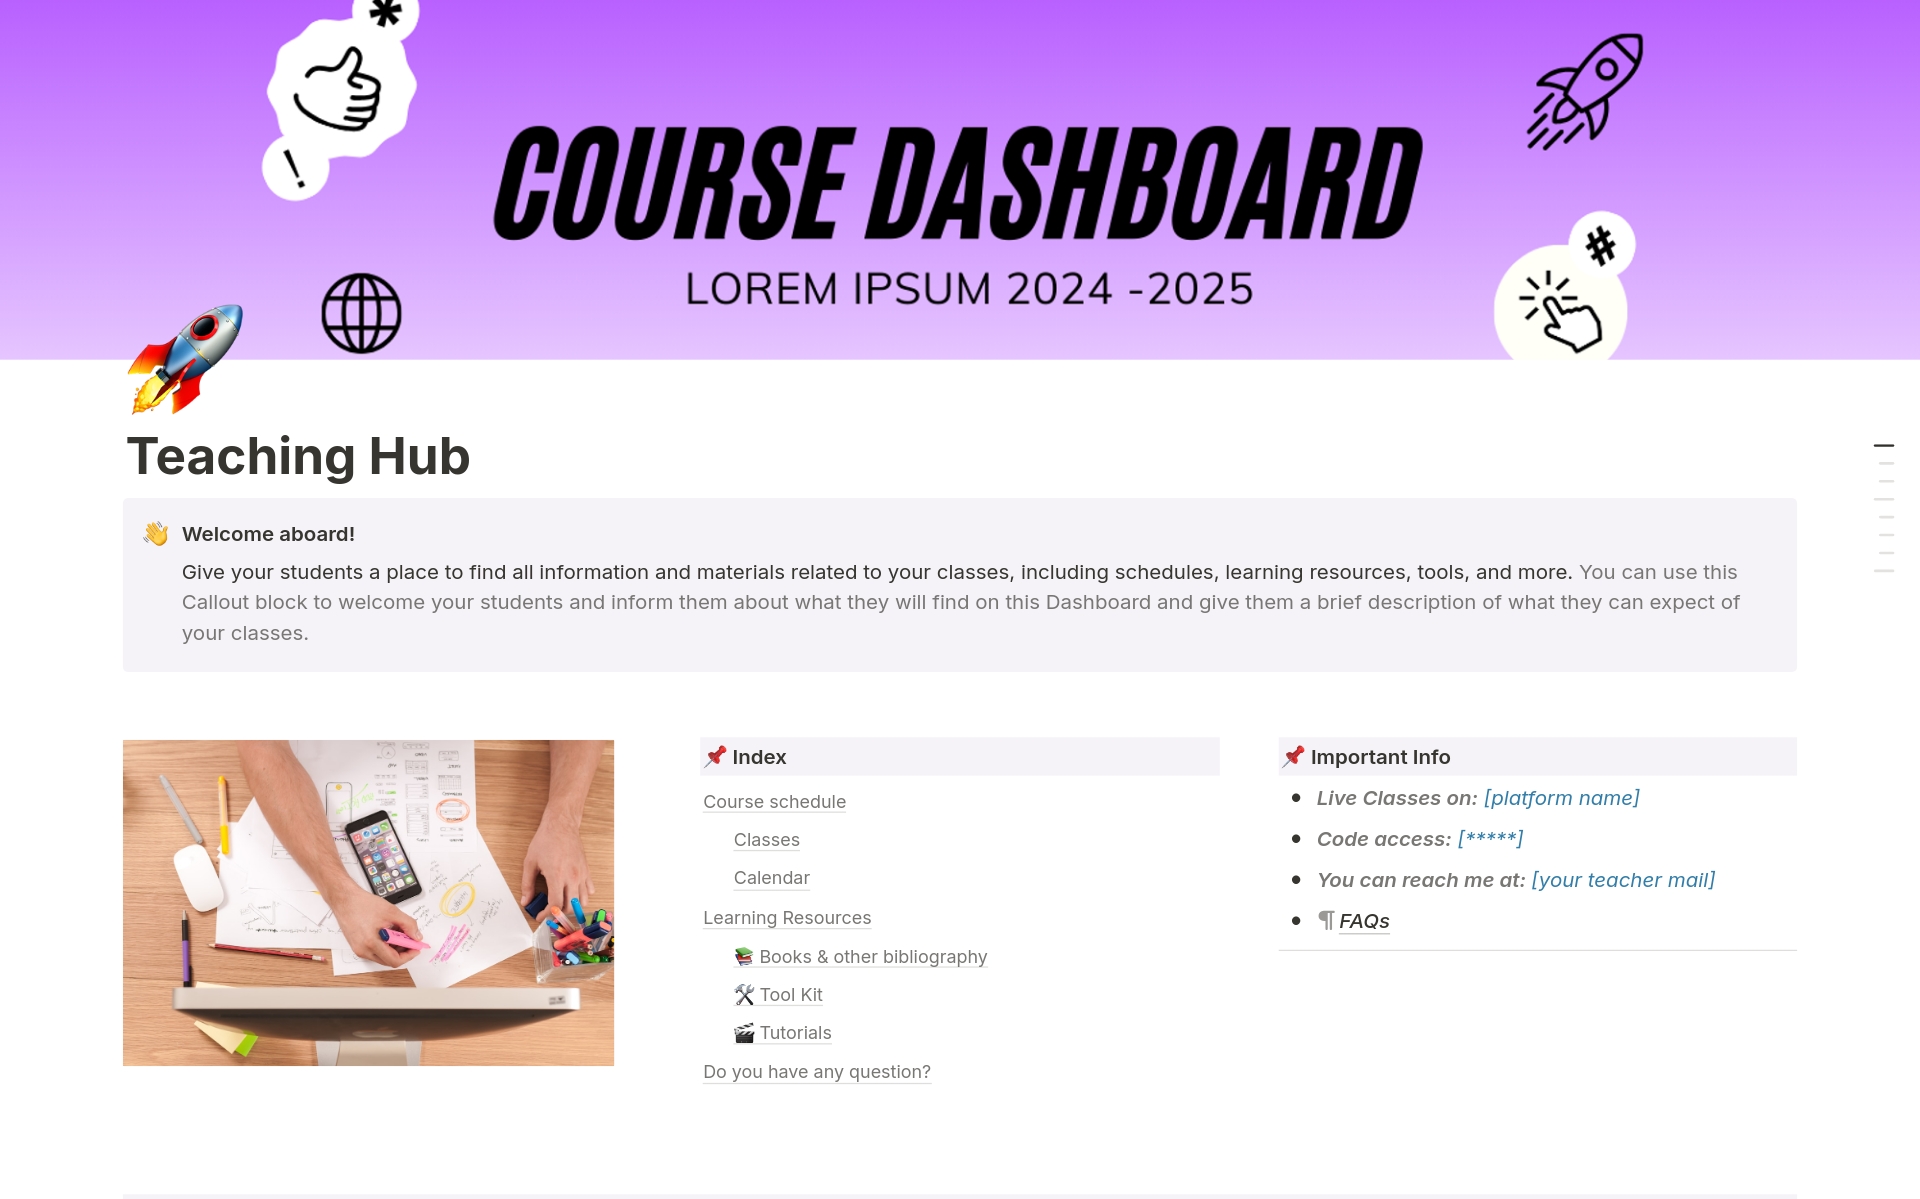 Streamline your teaching experience and maximize class time. 📚 This Online Classes Dashboard allows you to enhance efficiency in three key areas: Planning, Communication and Resource sharing with your students. Get started now and simplify your teaching experience! 🚀